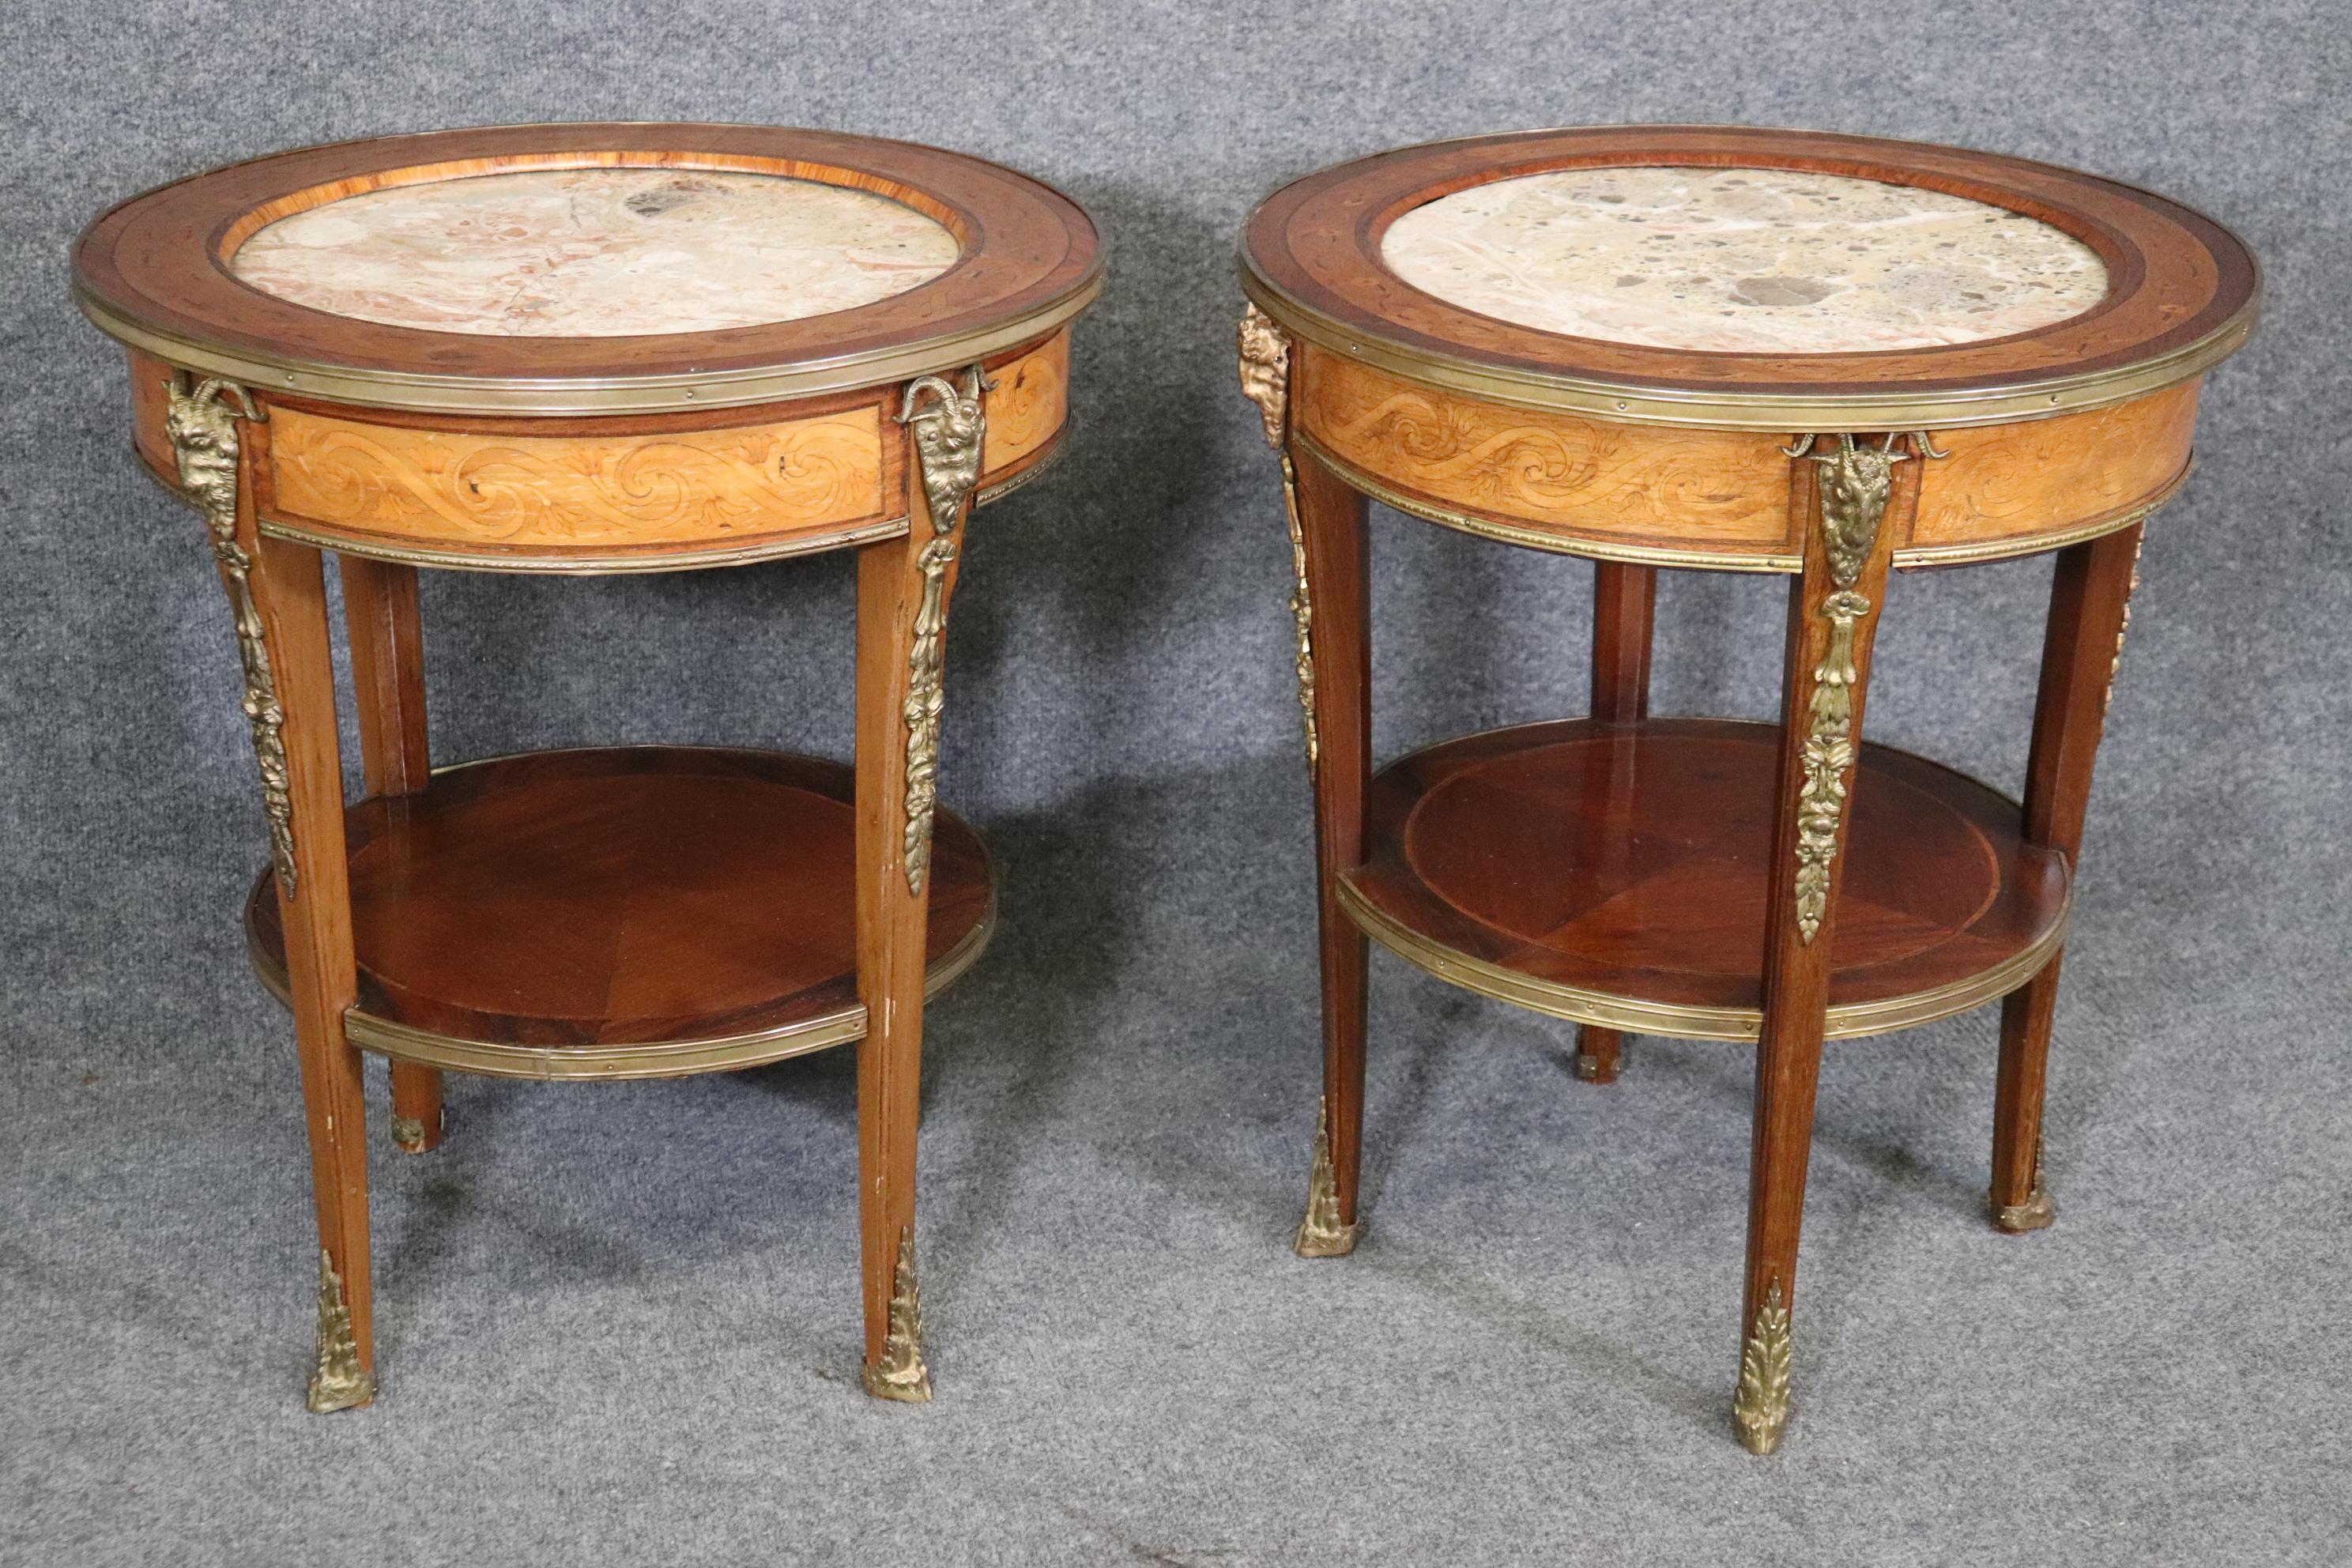 Superb Inlaid Satinwood and Walnut Marble Top Bronze Rams Head End Tables  1